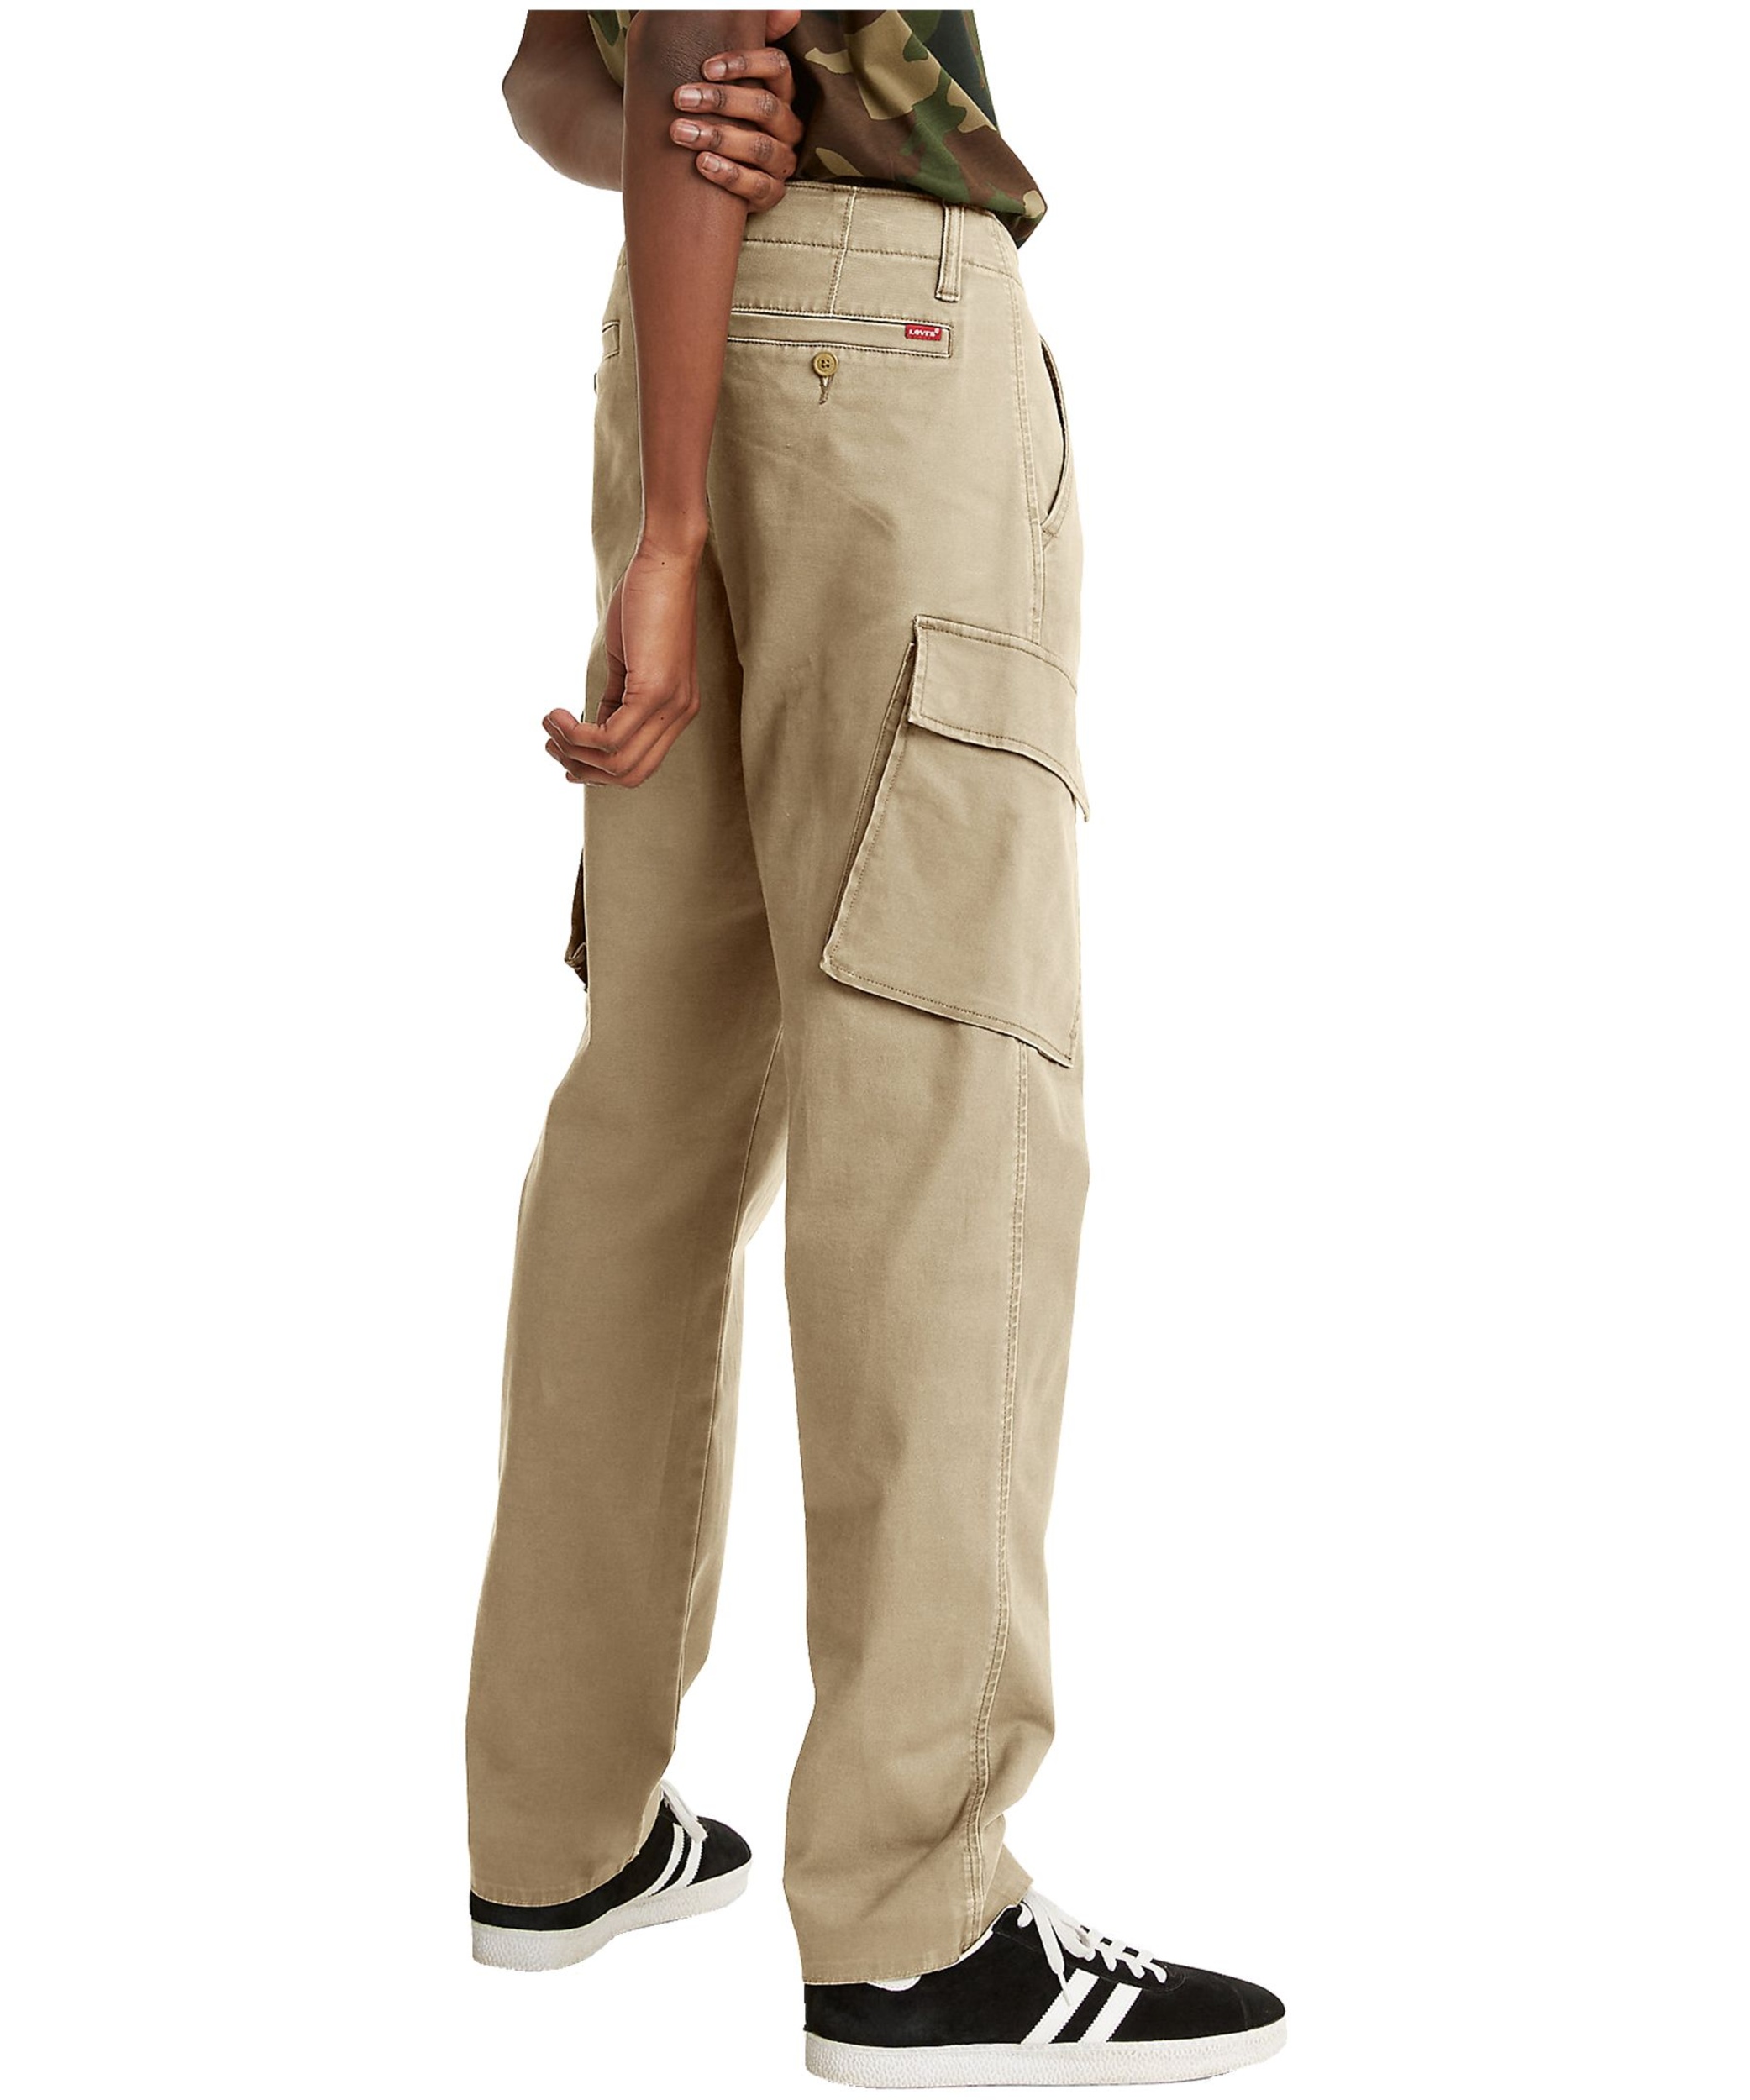 Levi's Men's XX Chino Low Rise Taper Fit Cotton Twill Cargo Pants | Marks